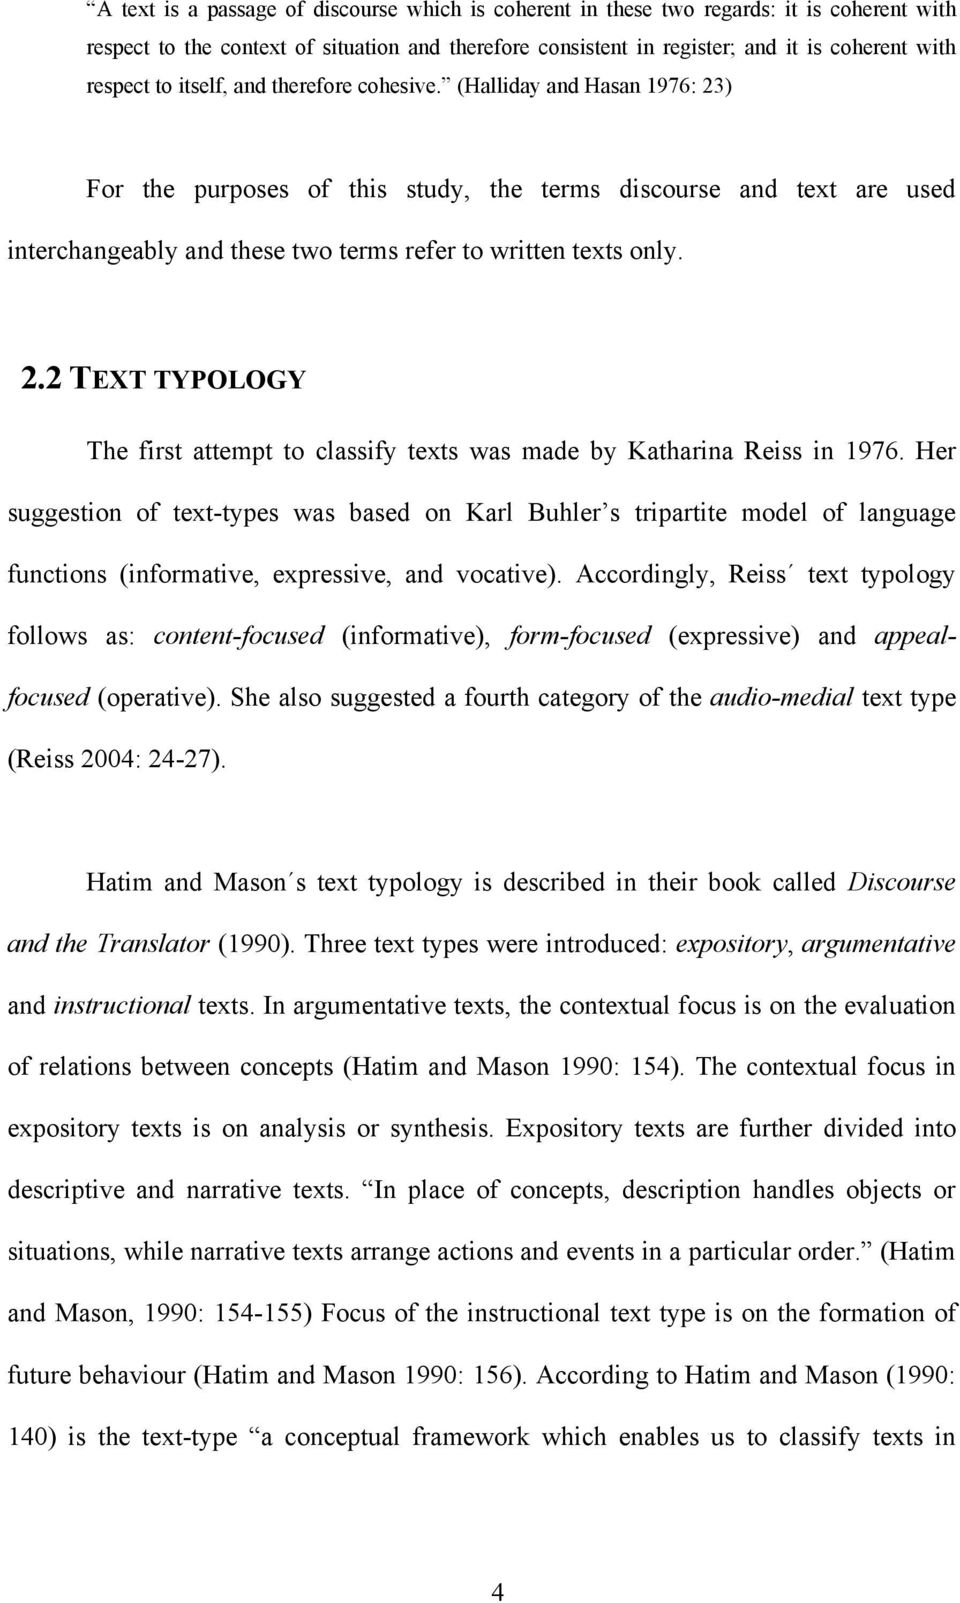 2.2 TEXT TYPOLOGY The first attempt to classify texts was made by Katharina Reiss in 1976.